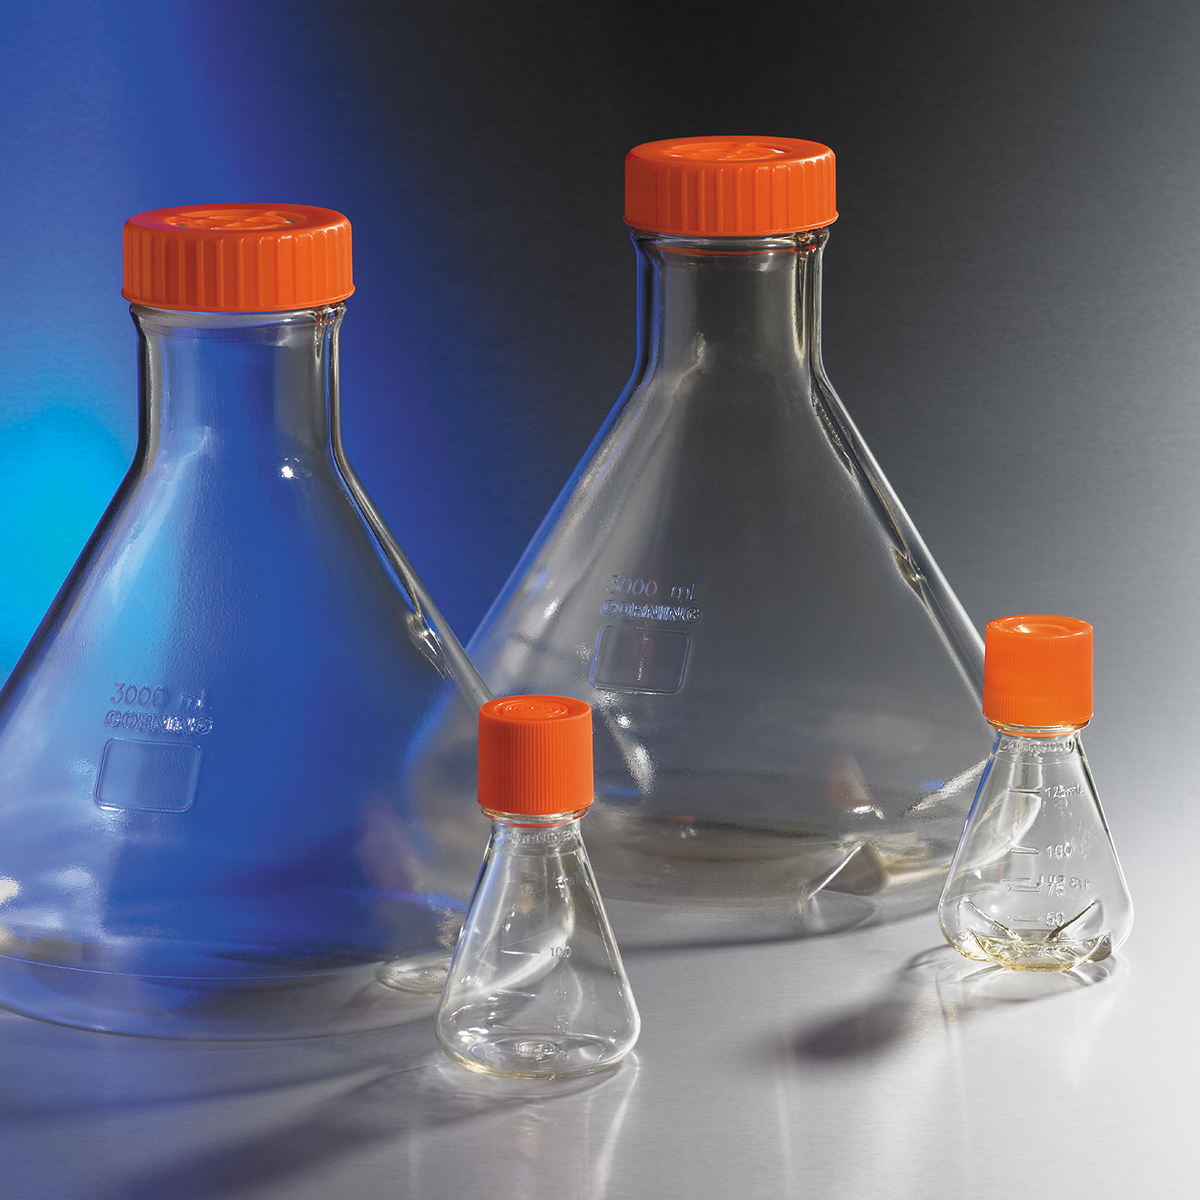 https://www.corning.com/catalog/cls/products/e/erlenmeyerShakerFlasks/431402/images/431402-PDP_A.jpg/_jcr_content/renditions/product.zoom.1200.jpg